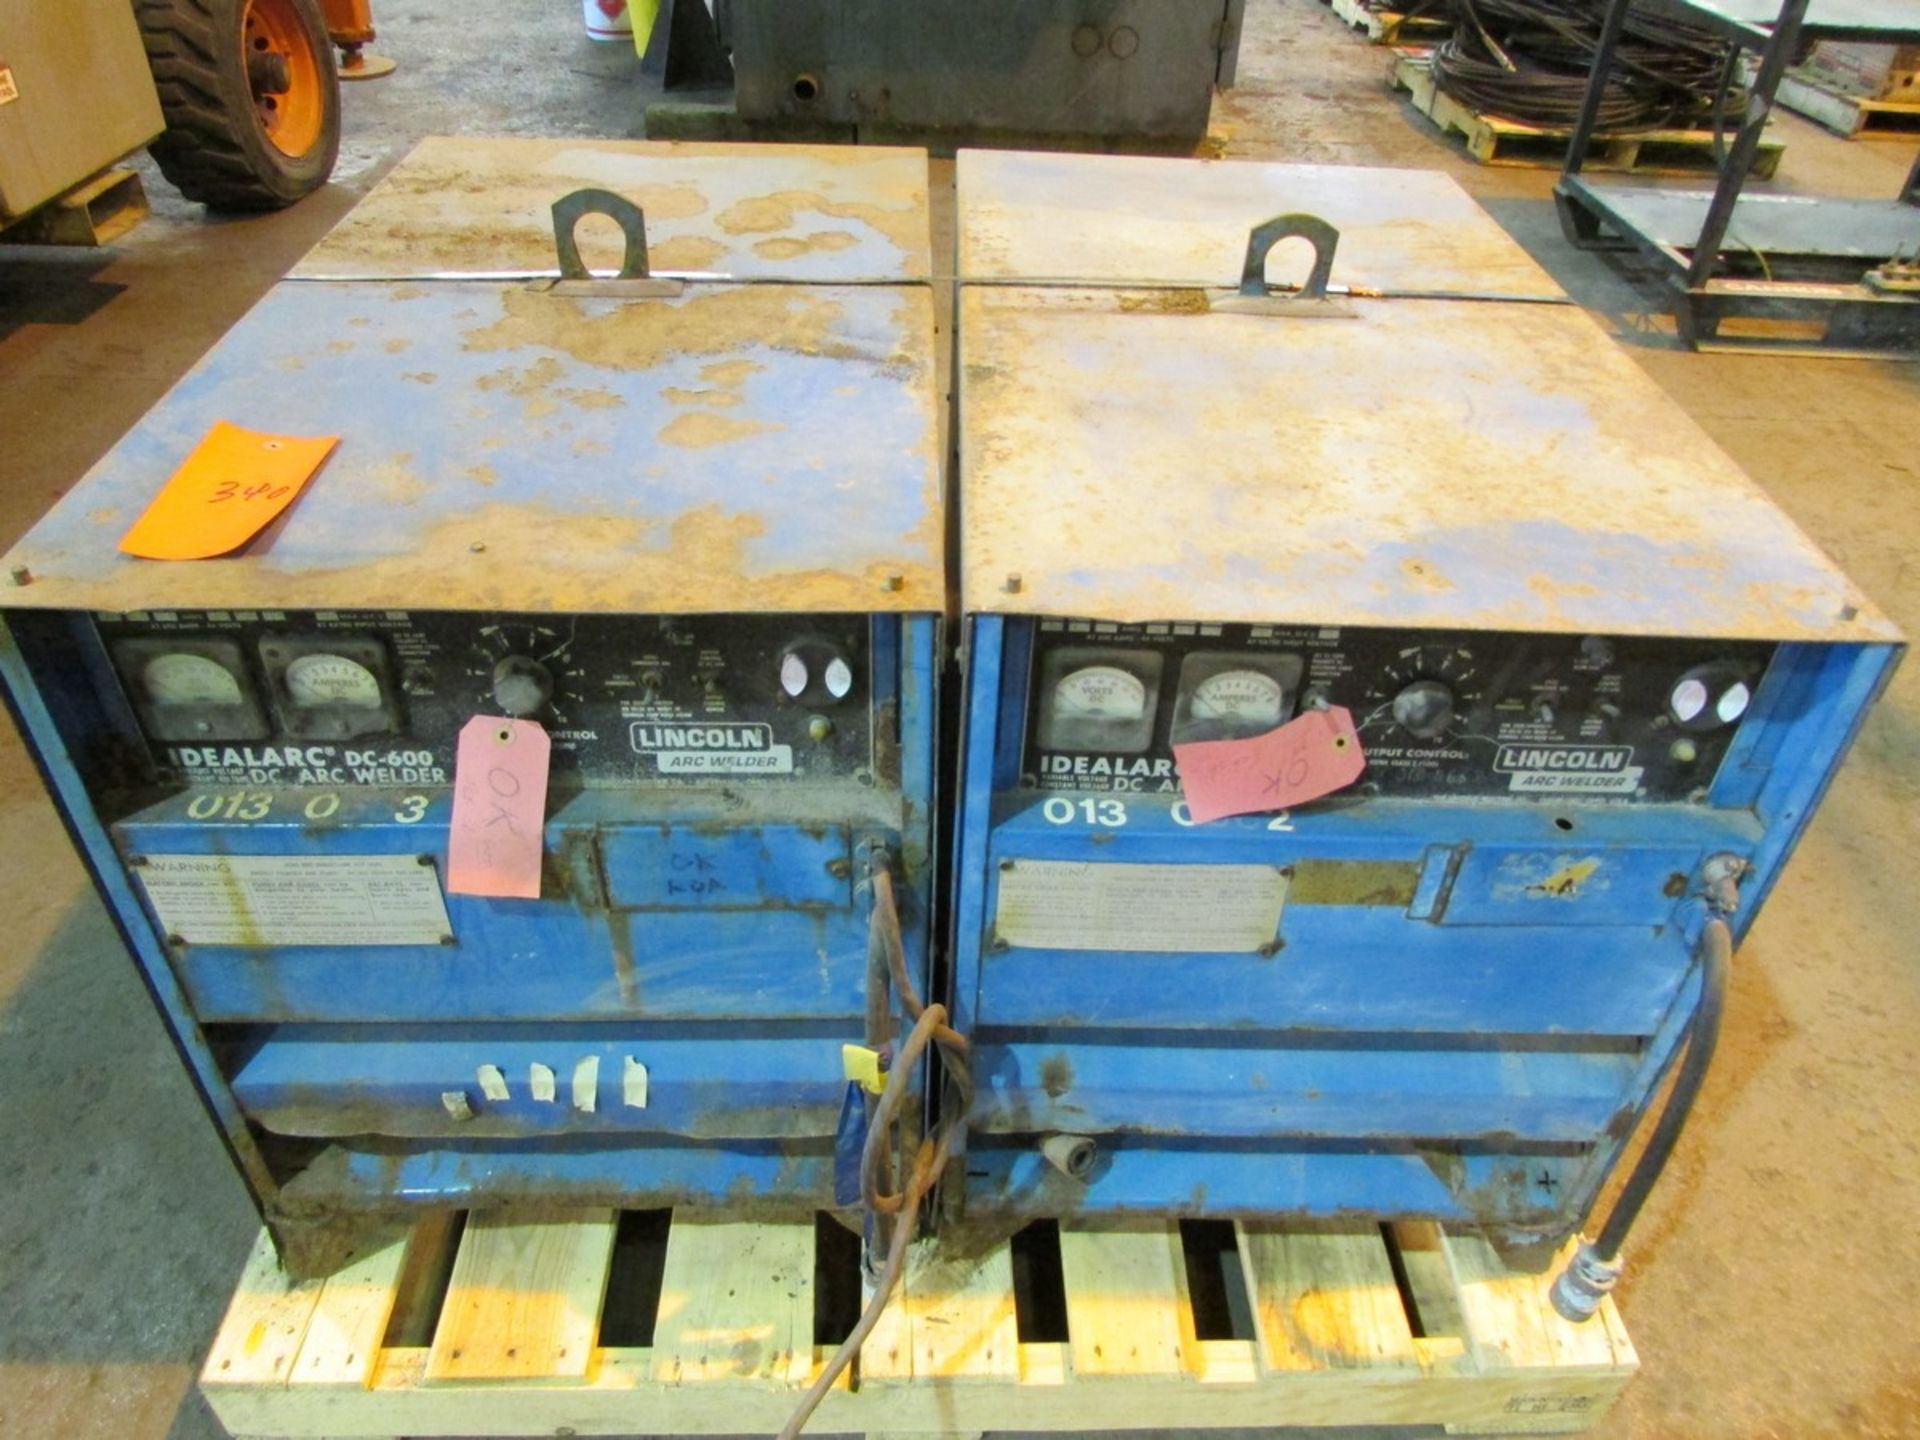 2 Lincoln Ideal Arc DC 600 Welders for Parts